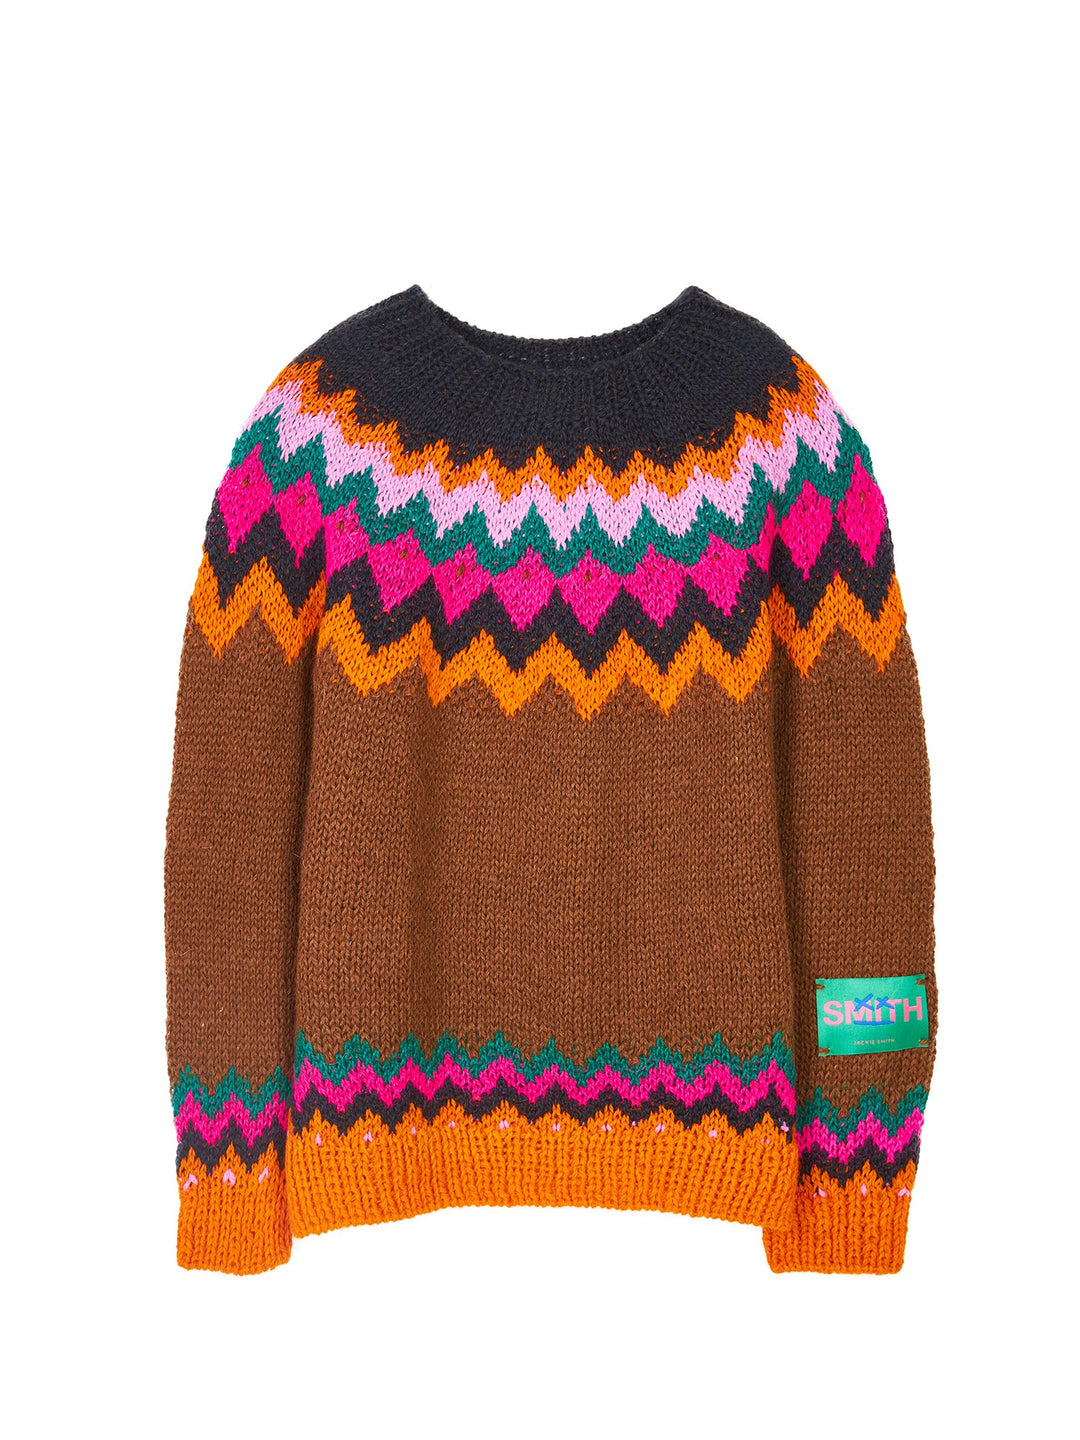 Carnavalito Hand Knitted Sweater